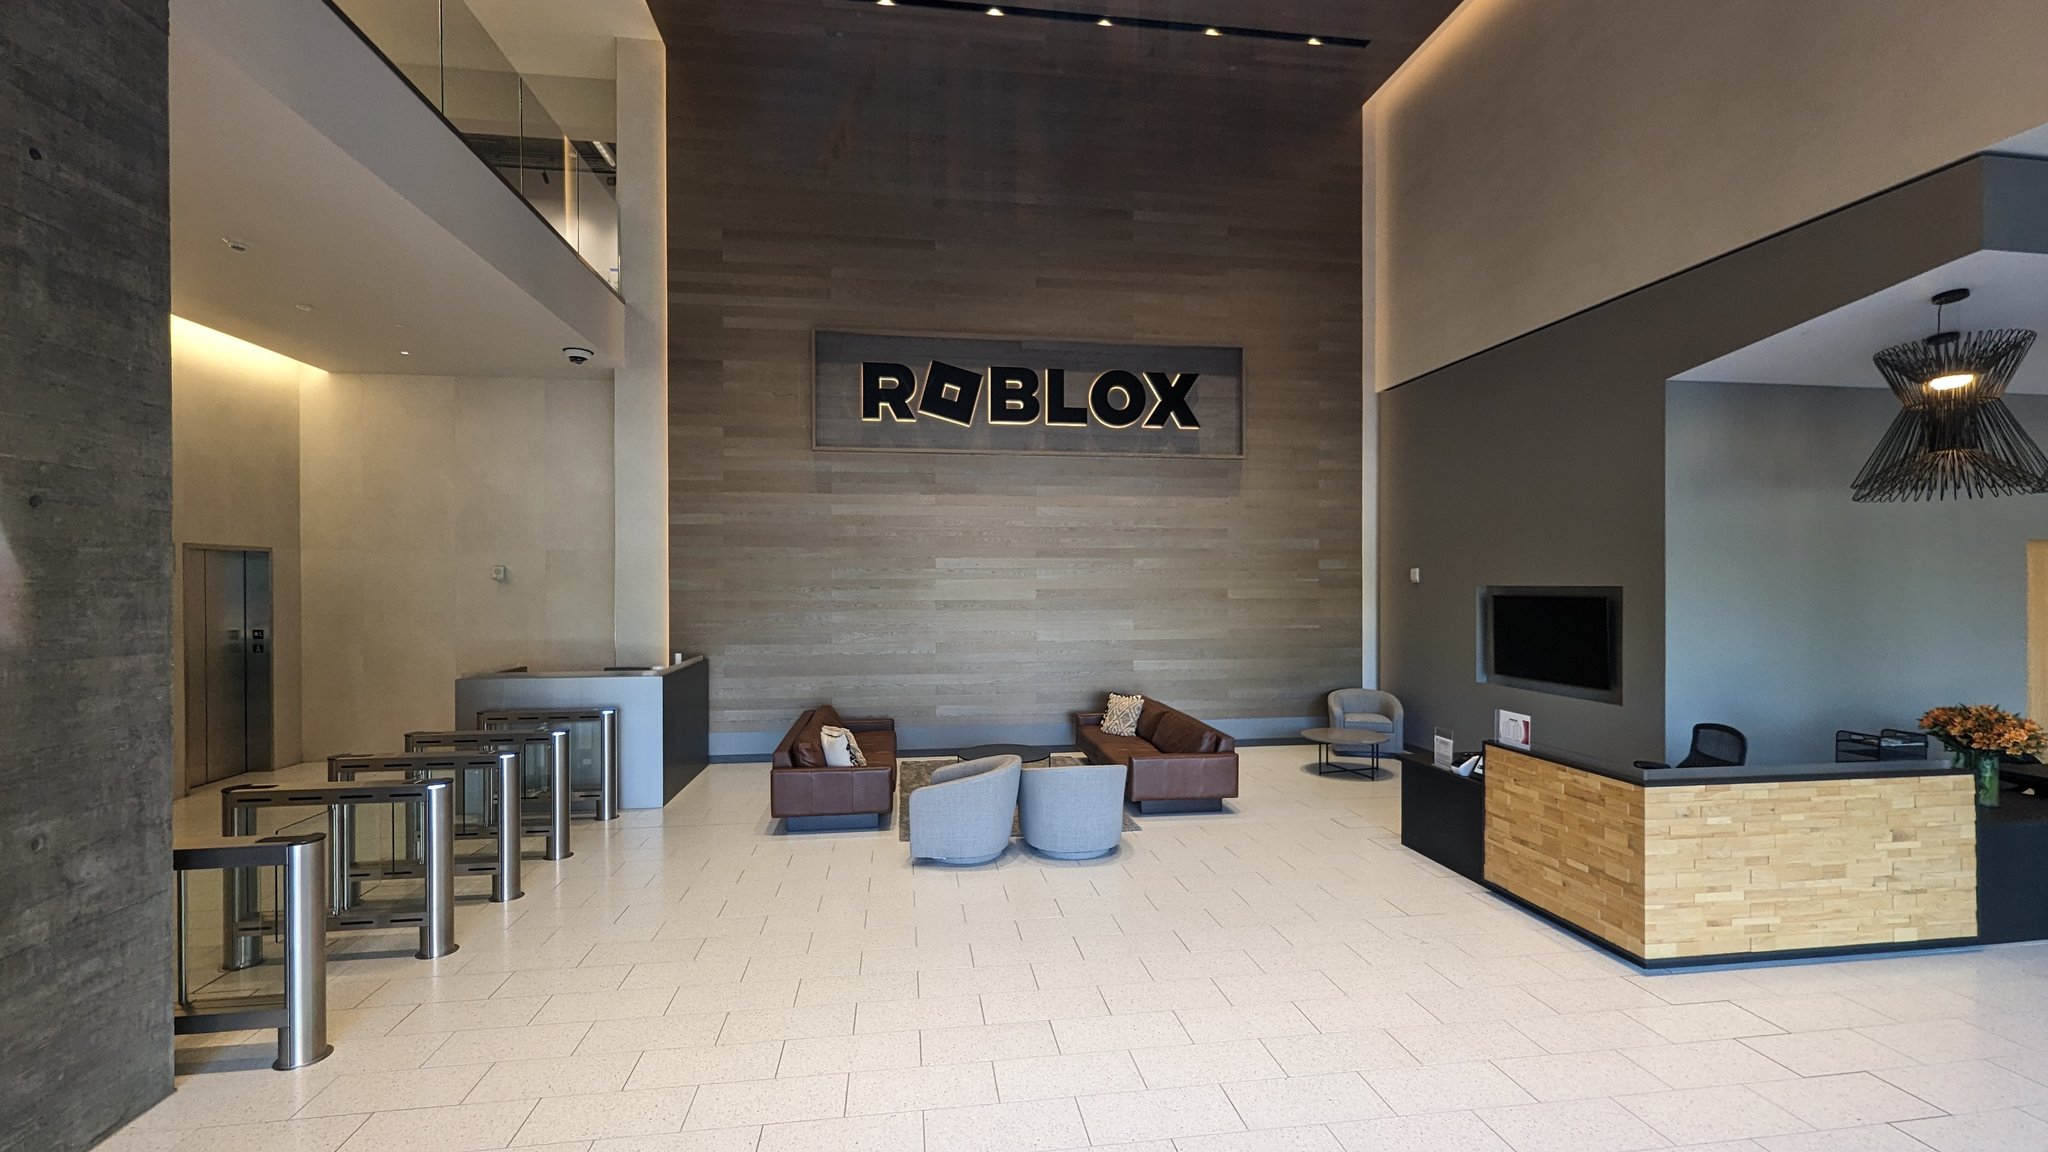 Bloxy News on X: Roblox Corporation is planning to lease an additional  123,000 square feet of space for it's headquarters located in San Mateo,  California by the first quarter of 2022. This